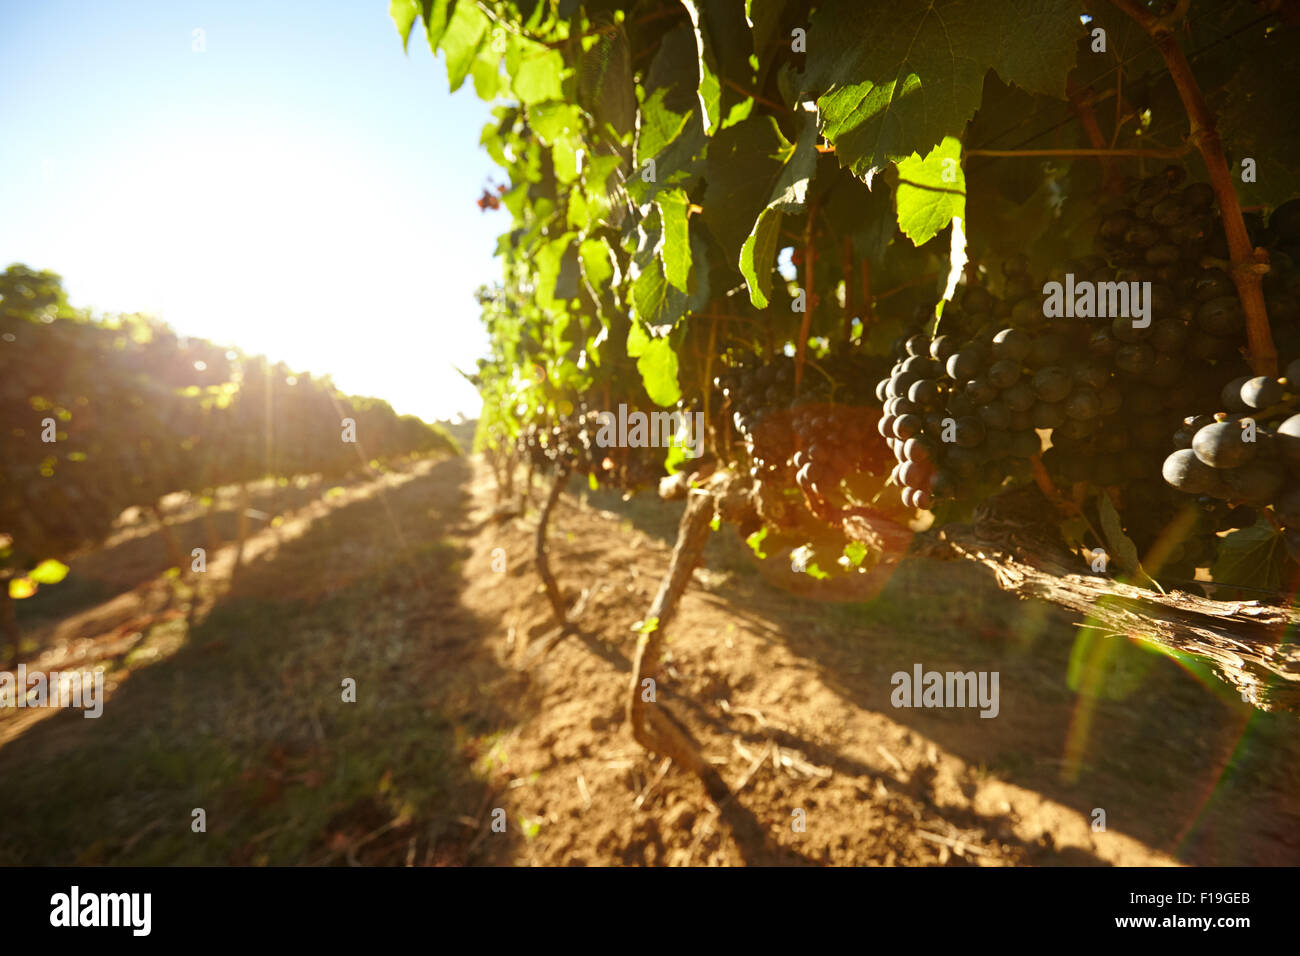 Black grapes on vines with bright sunlight on a summer day. Rows of vines bearing fruit in vineyard with sun flare. Stock Photo